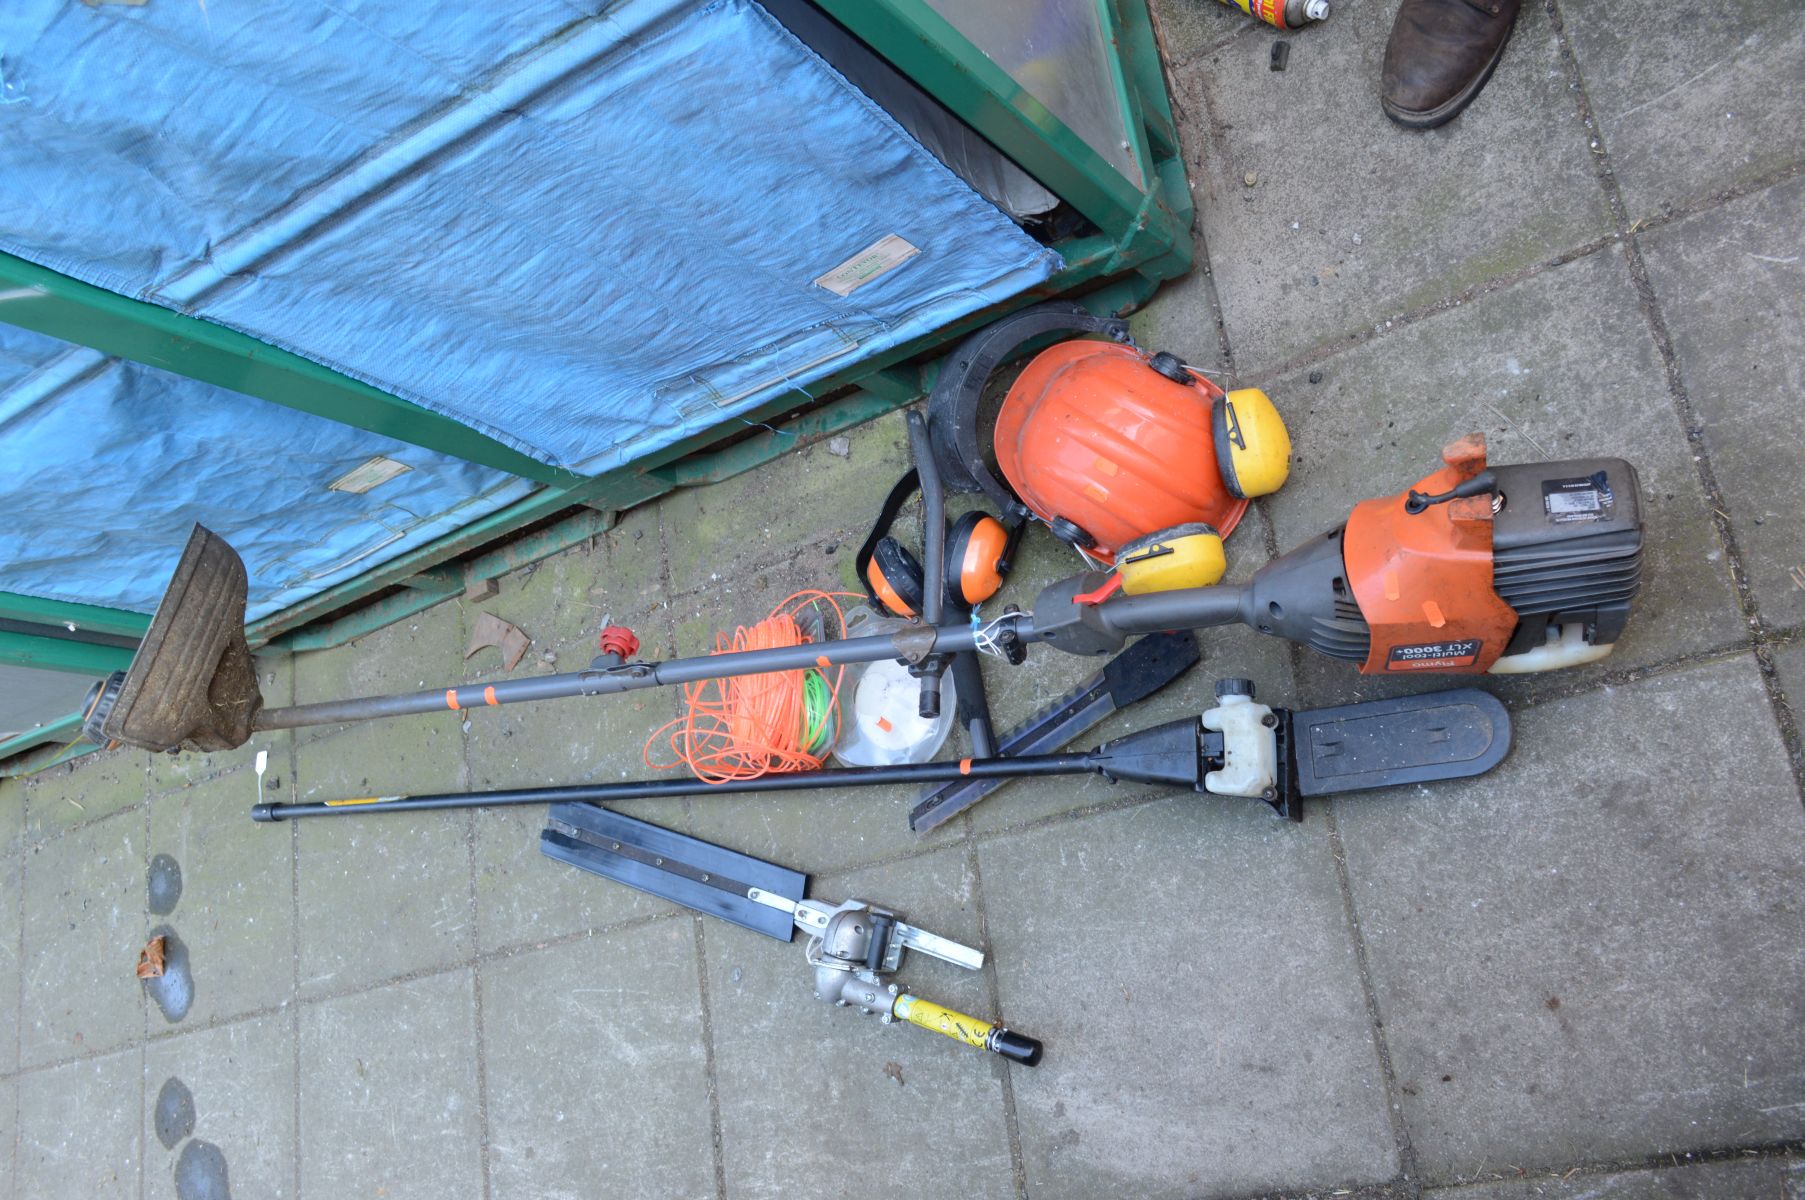 A FLYMO XLT 3000 PETROL GARDEN MULTI TOOL with various attachments including a garden trimmer, extra